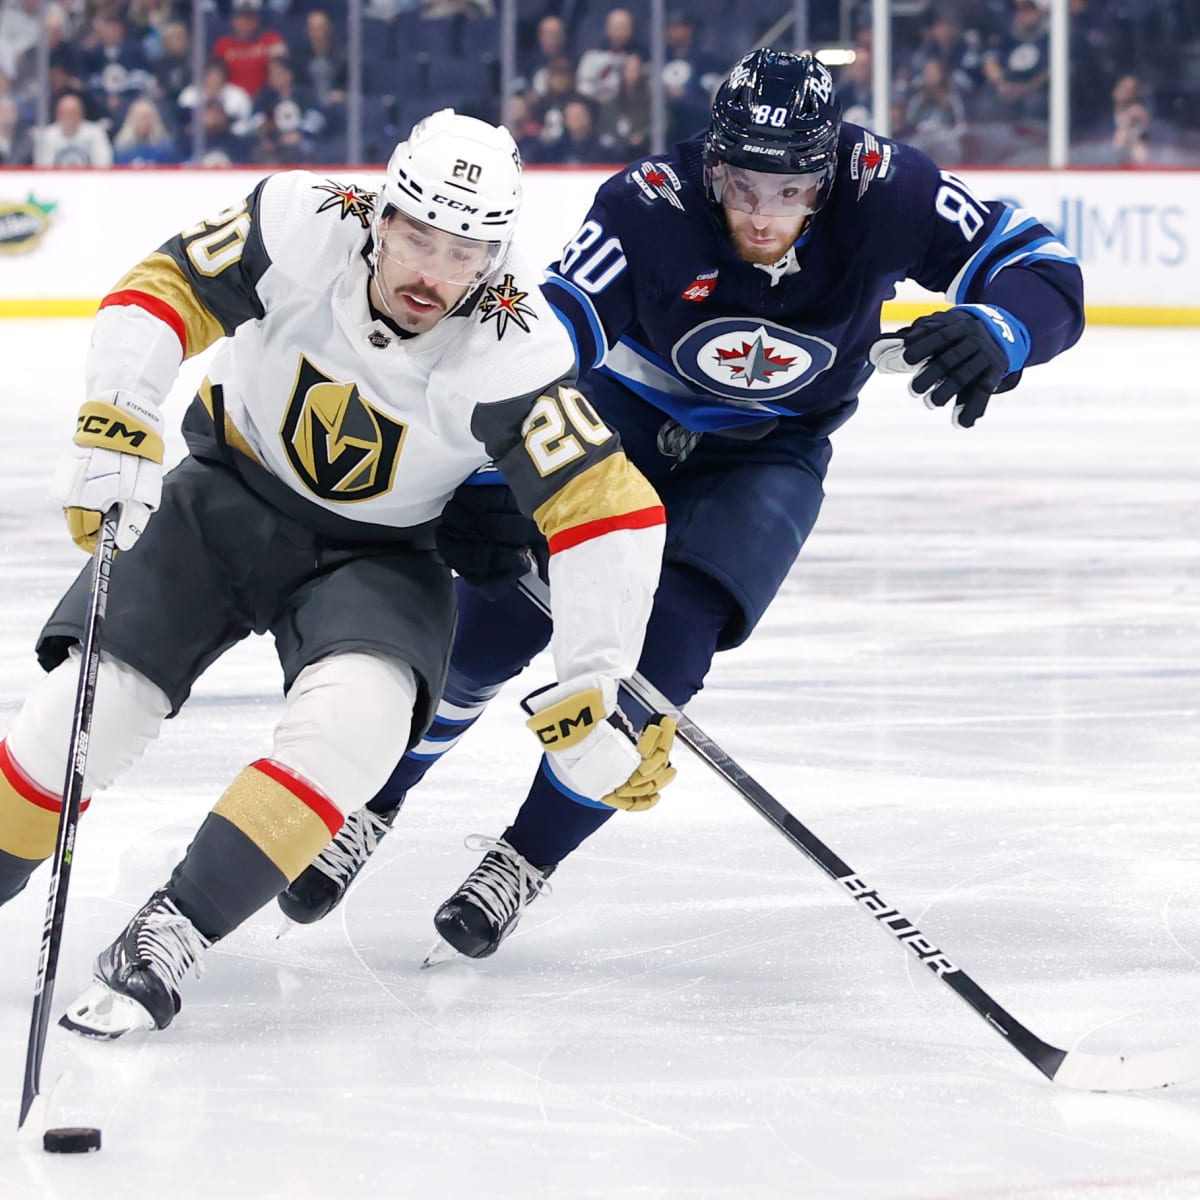 Flames finish strong to finish off Golden Knights